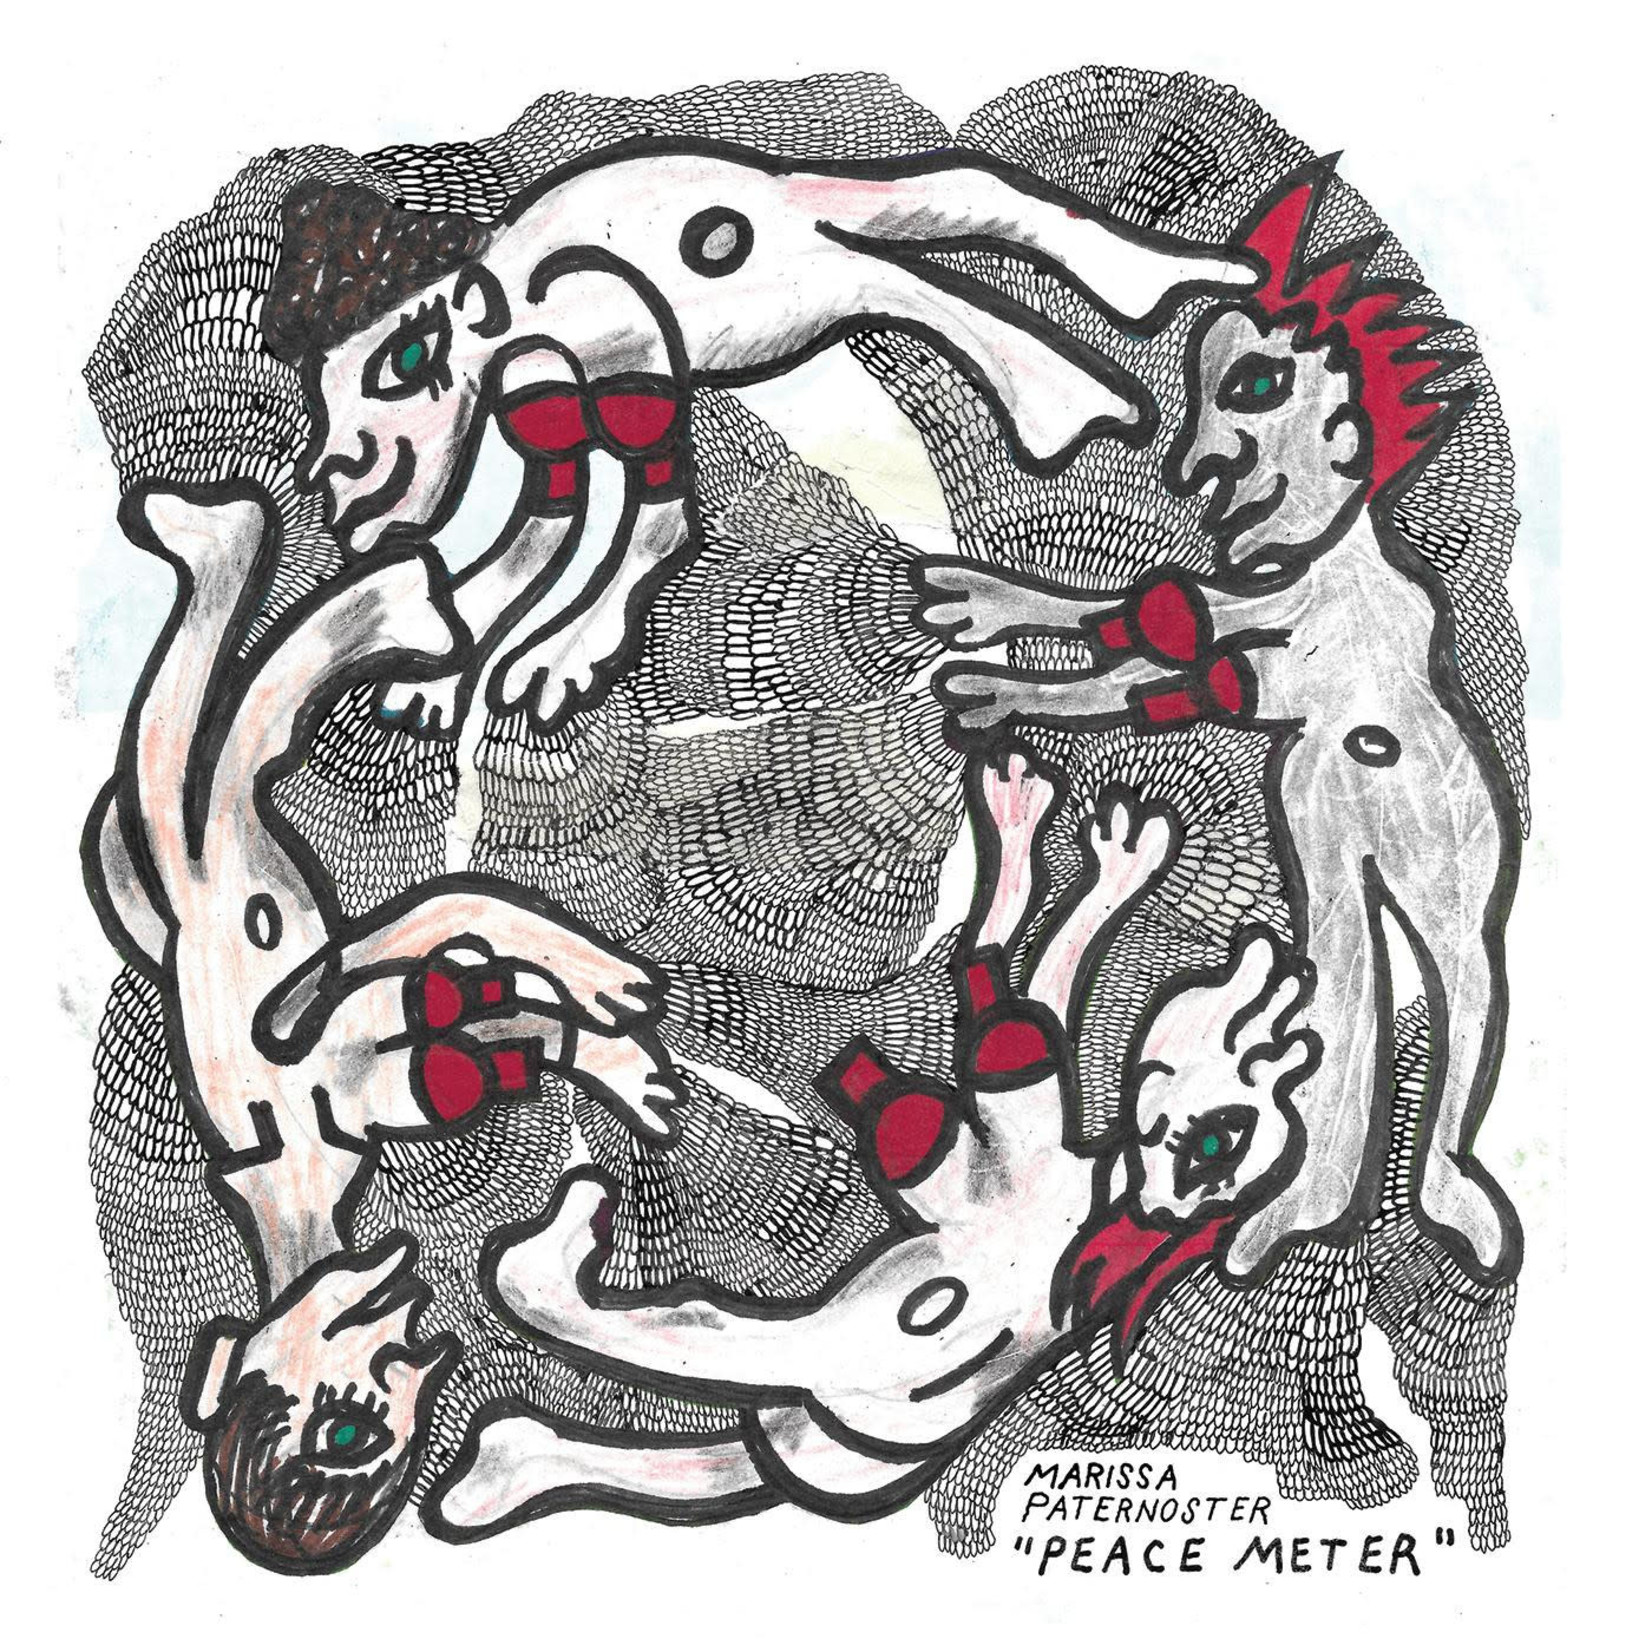 Don Giovanni Marissa Paternoster - Peace Meter (LP) [Ruby]